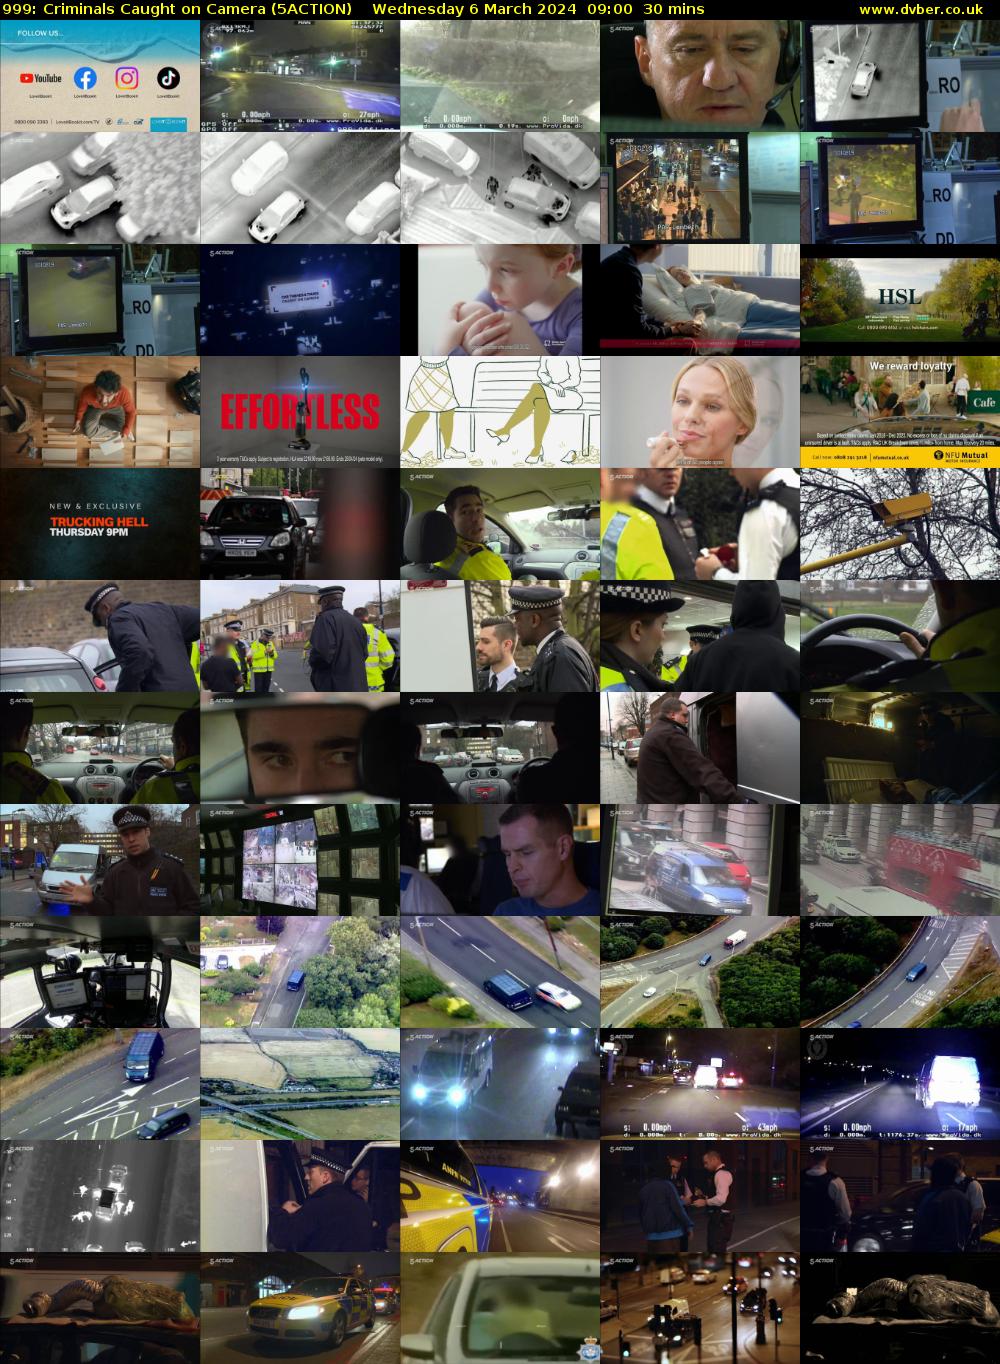 999: Criminals Caught on Camera (5ACTION) Wednesday 6 March 2024 09:00 - 09:30